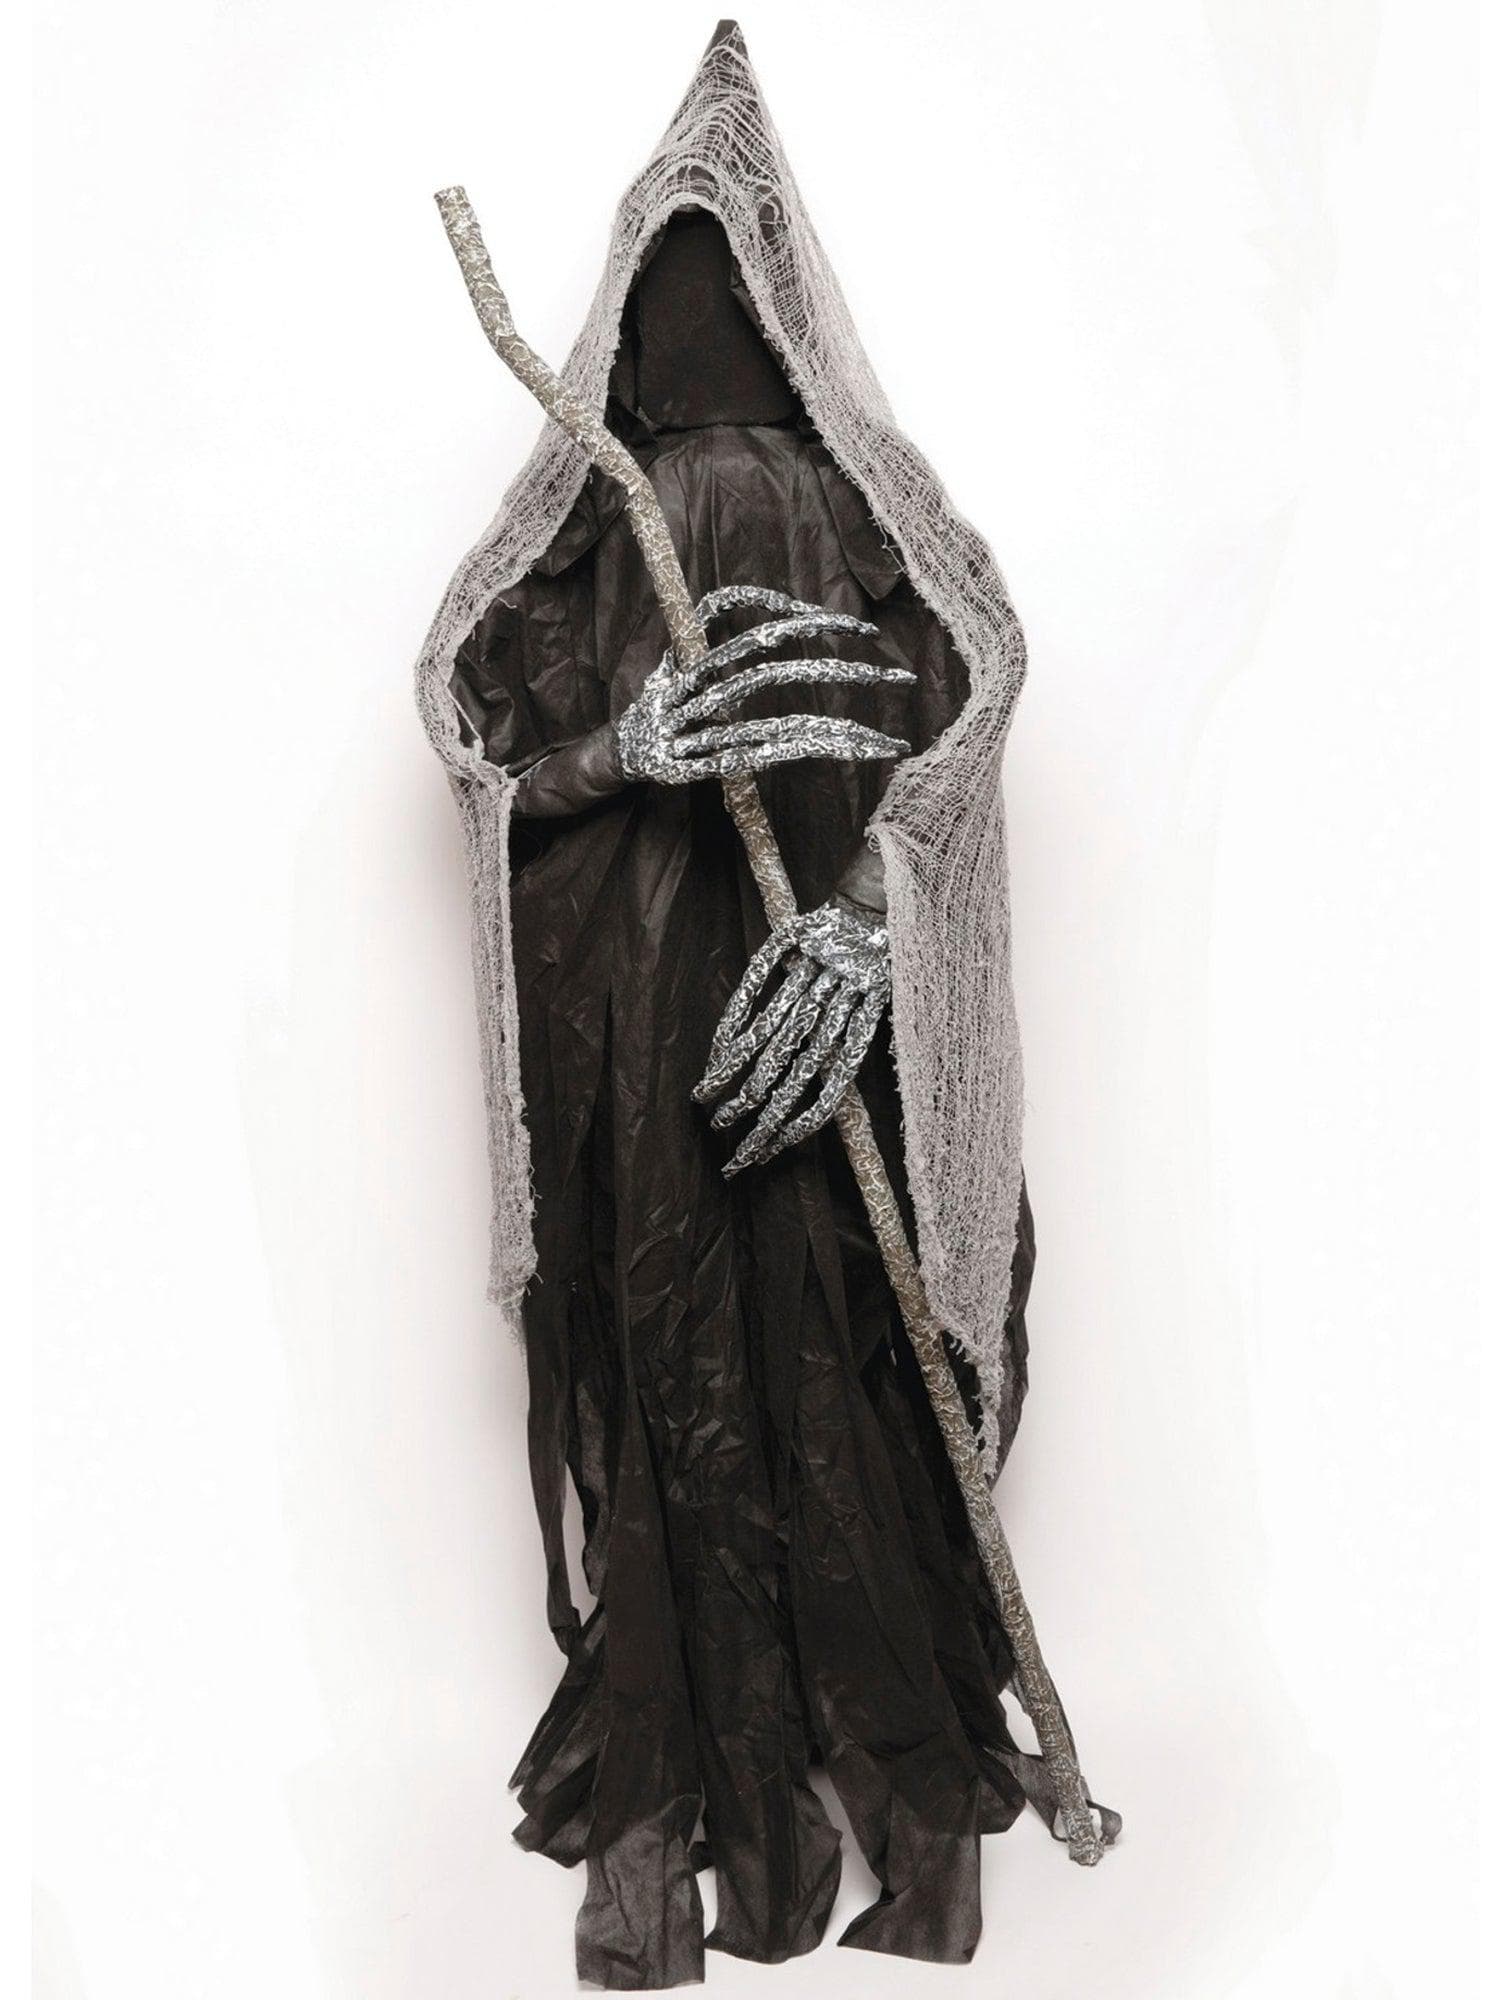 6 Foot Reaper with Staff Standing Prop - costumes.com